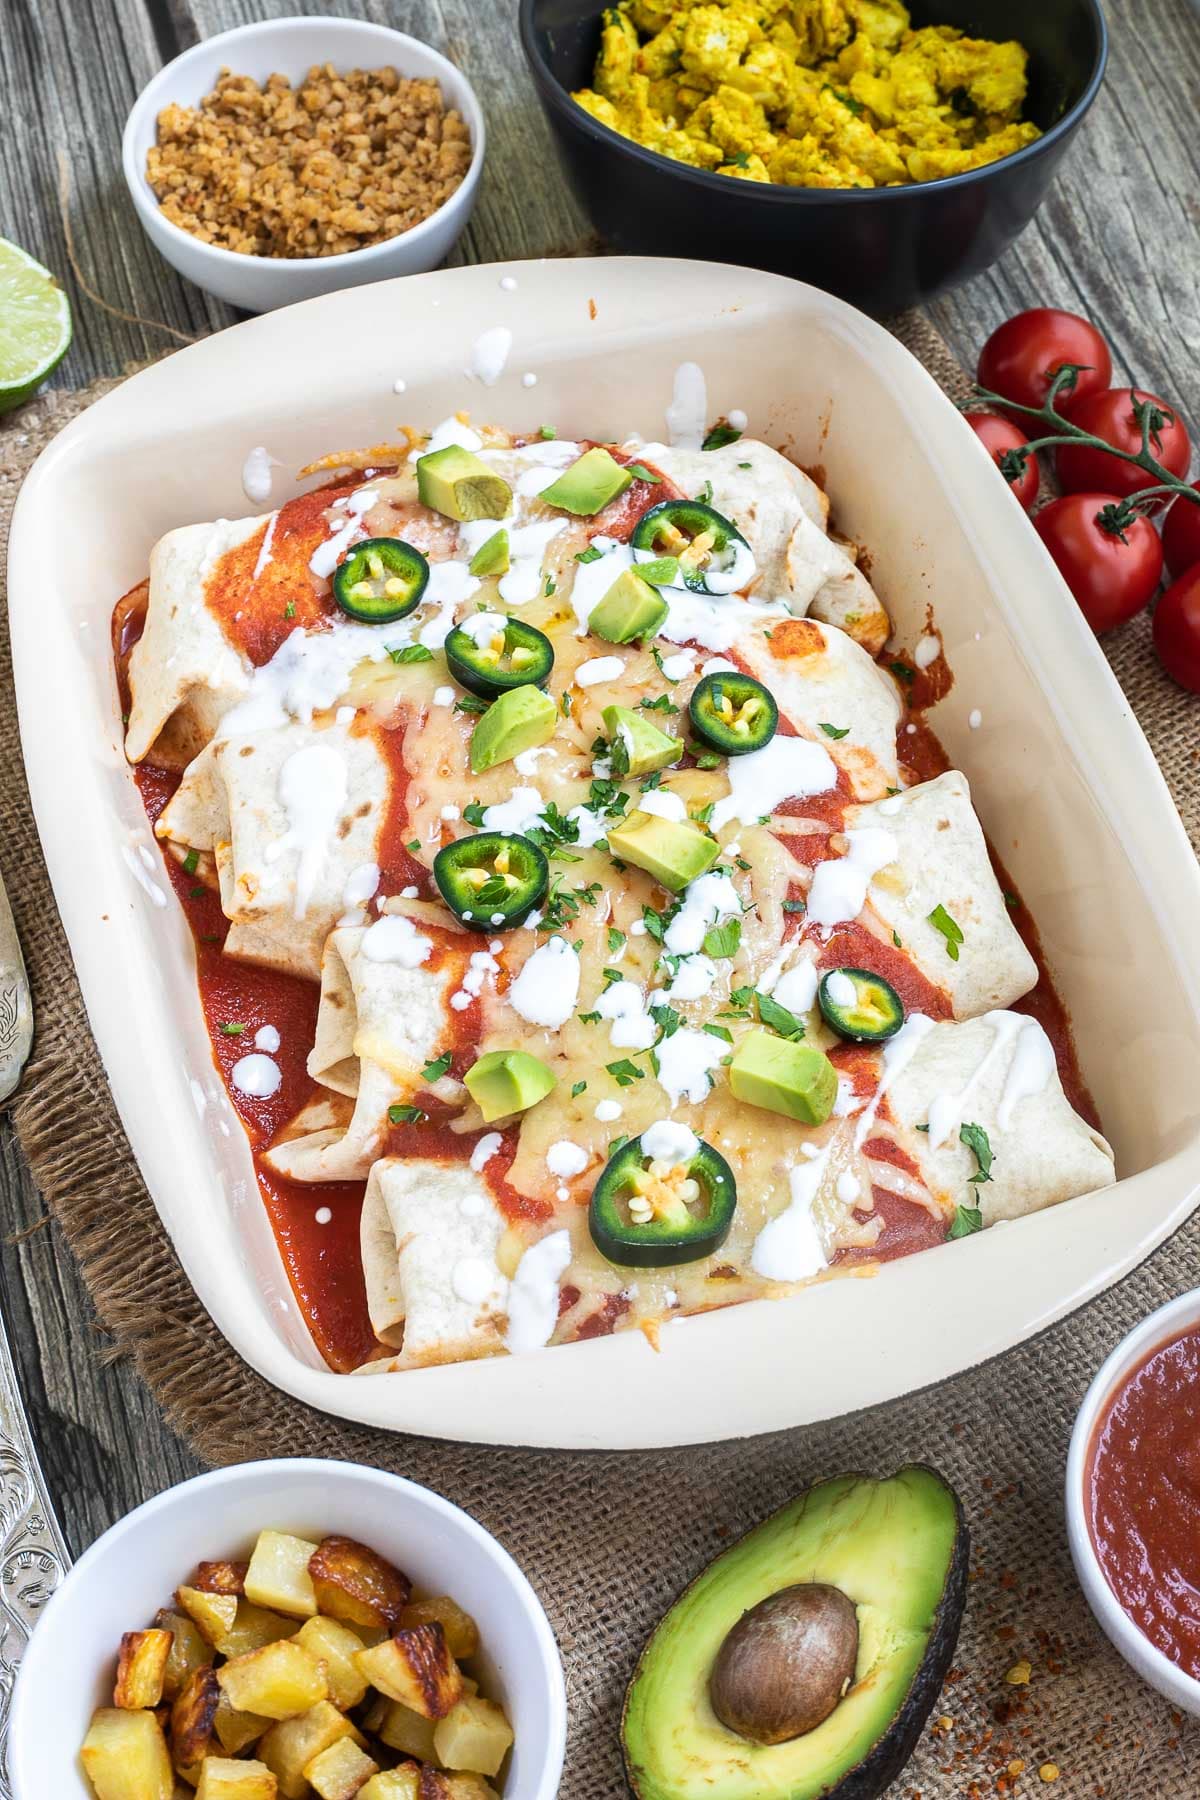 4 tortilla wraps topped with red sauce, melted cheese, sour cream, green chili peppers and fresh chopped herbs tucked closely together in a ceramic pan. Leftover filling ingredients are next to the pan in small bowls.